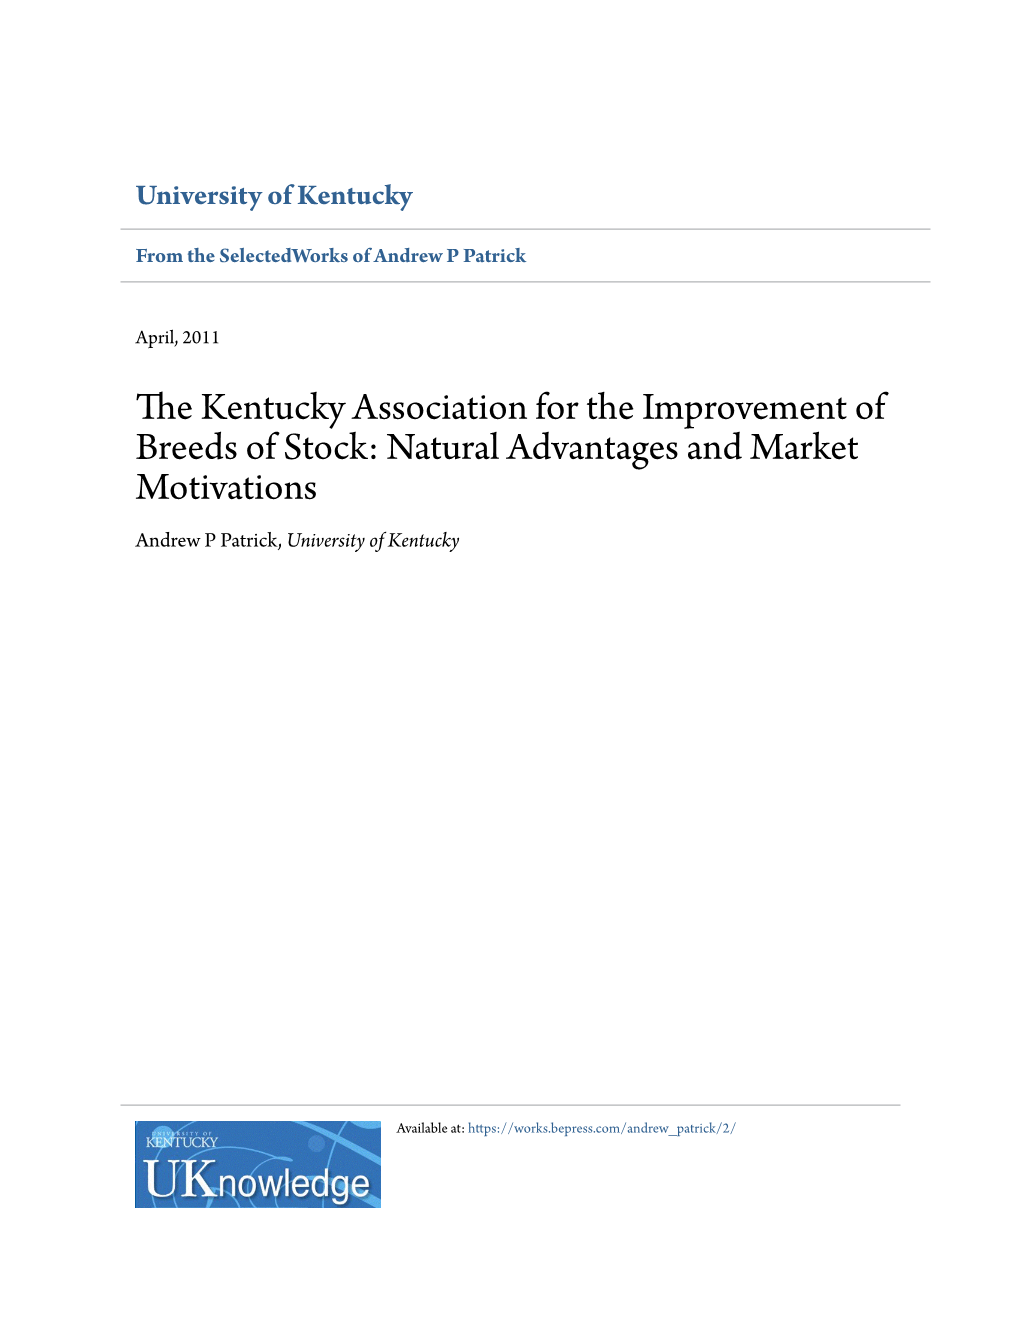 The Kentucky Association for the Improvement of Breeds of Stock: Natural Advantages and Market Motivations Andrew P Patrick, University of Kentucky